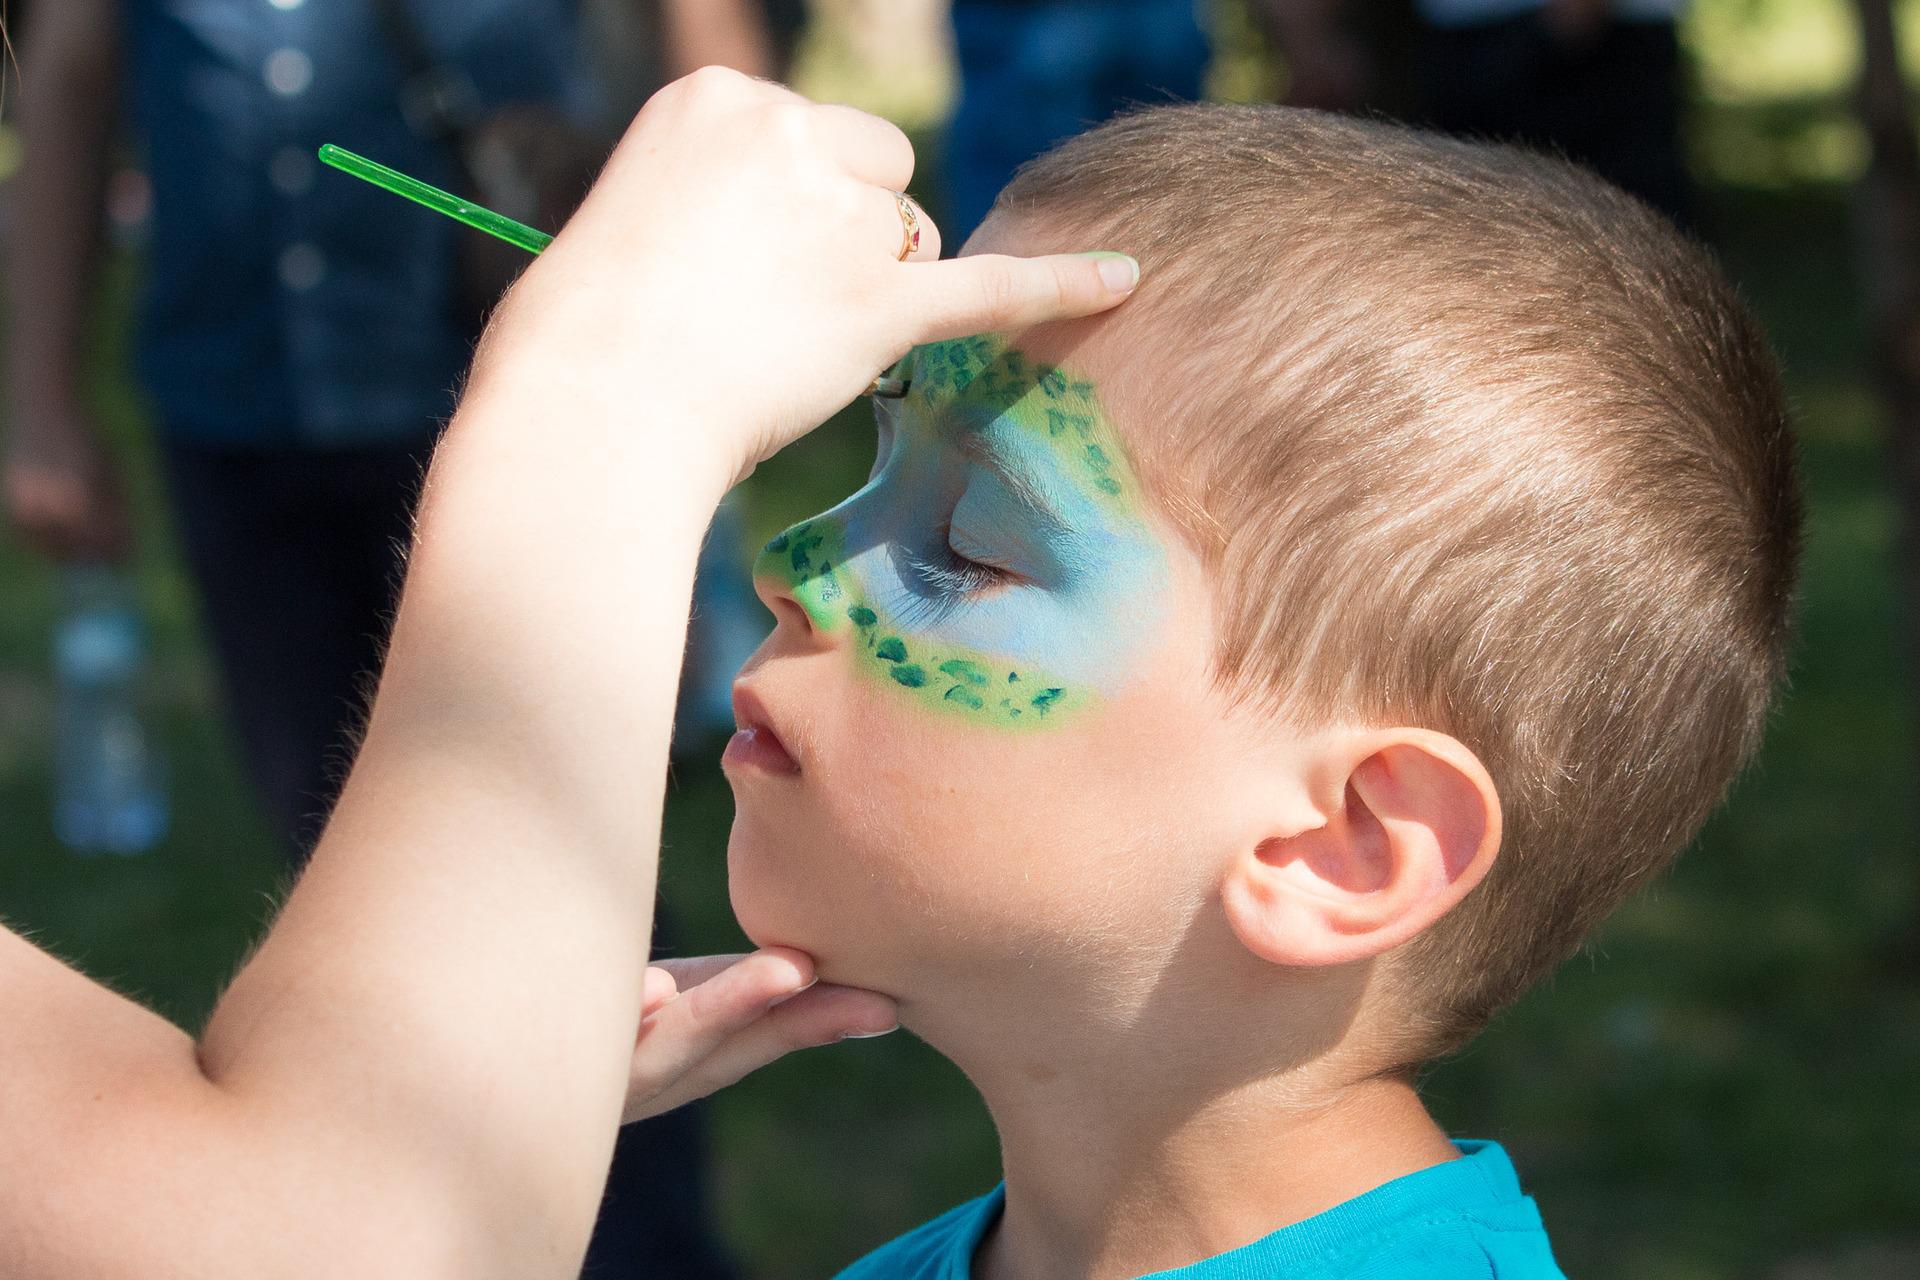 Child gets their face painted with blue and green face paint.